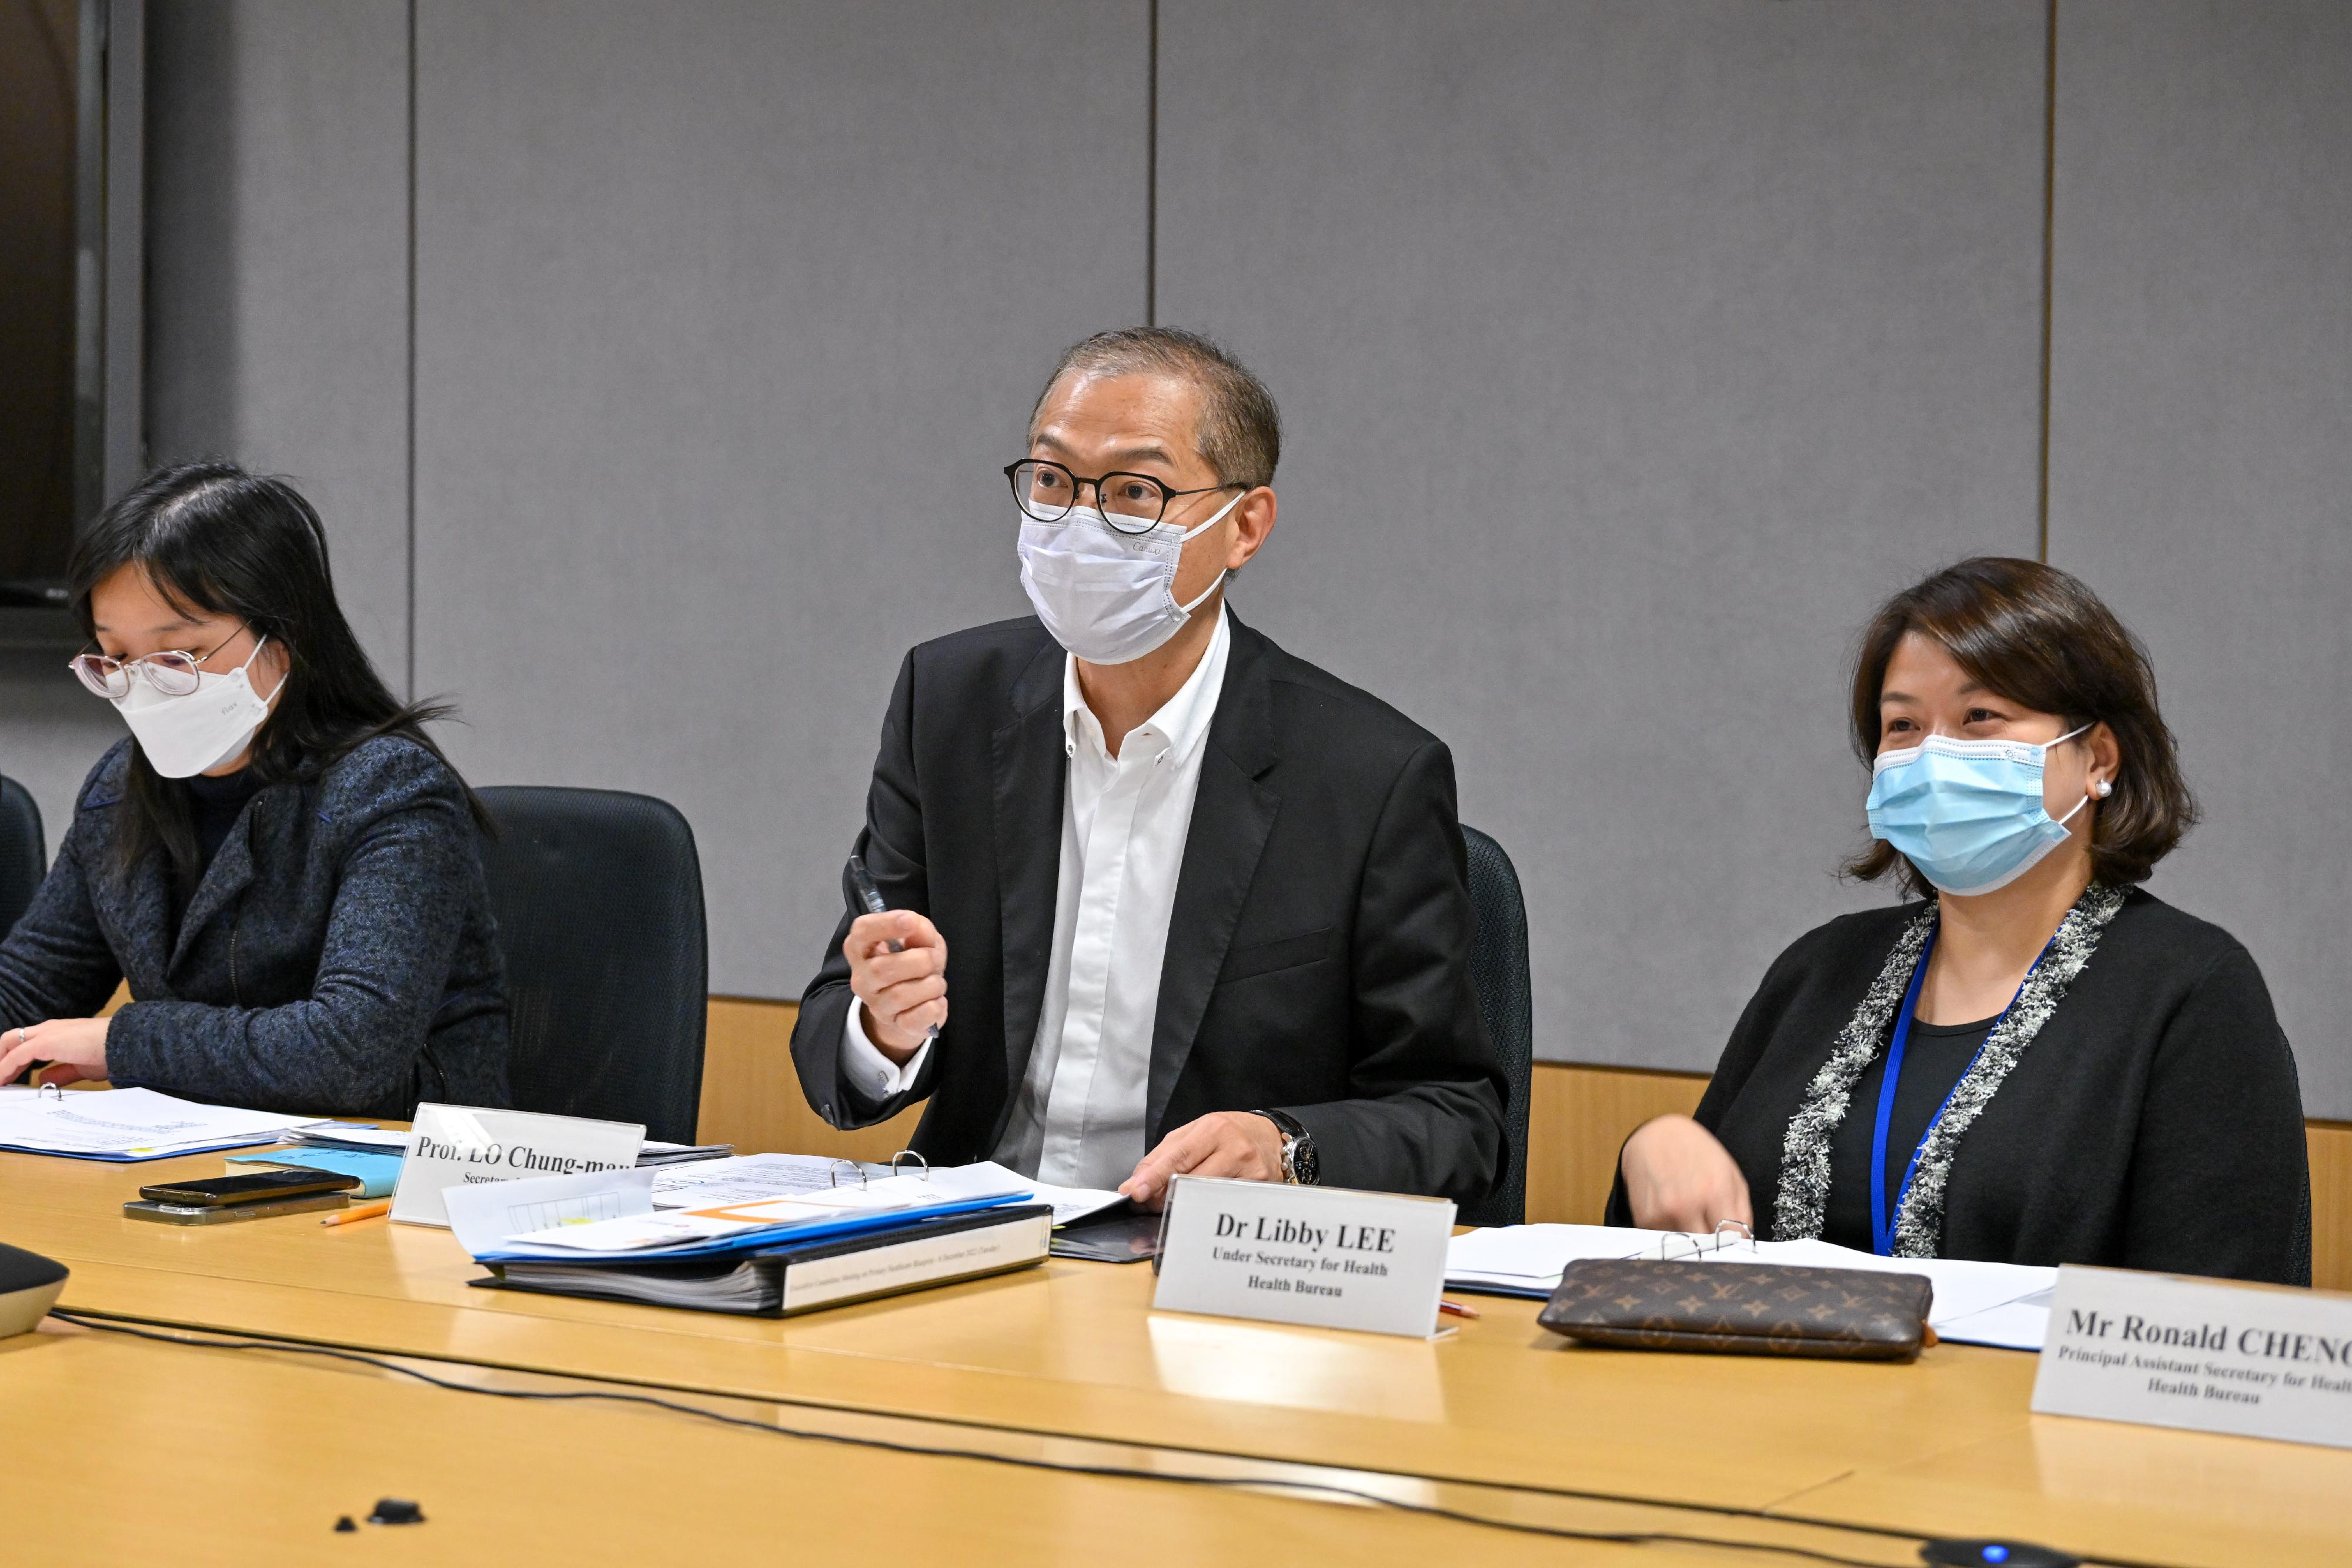 The Secretary for Health, Professor Lo Chung-mau (centre), introduced the various healthcare-related policy initiatives in the Chief Executive's 2022 Policy Address to representatives of the medical sector today (December 6). The Under Secretary for Health, Dr Libby Lee (right), also attended.